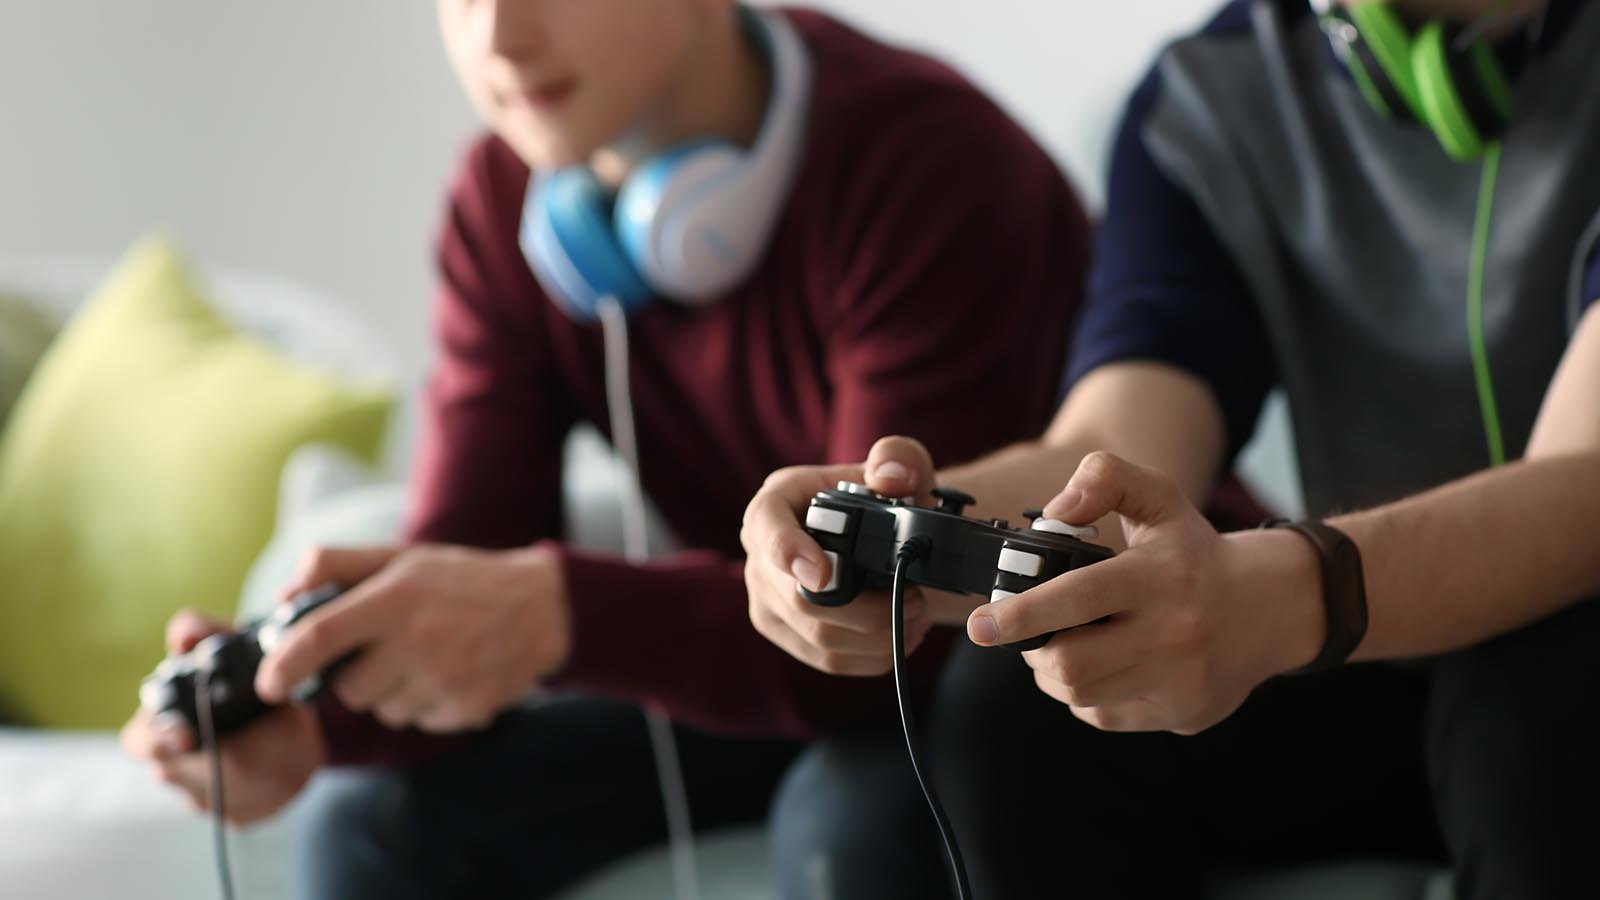 Image of two boys playing video games